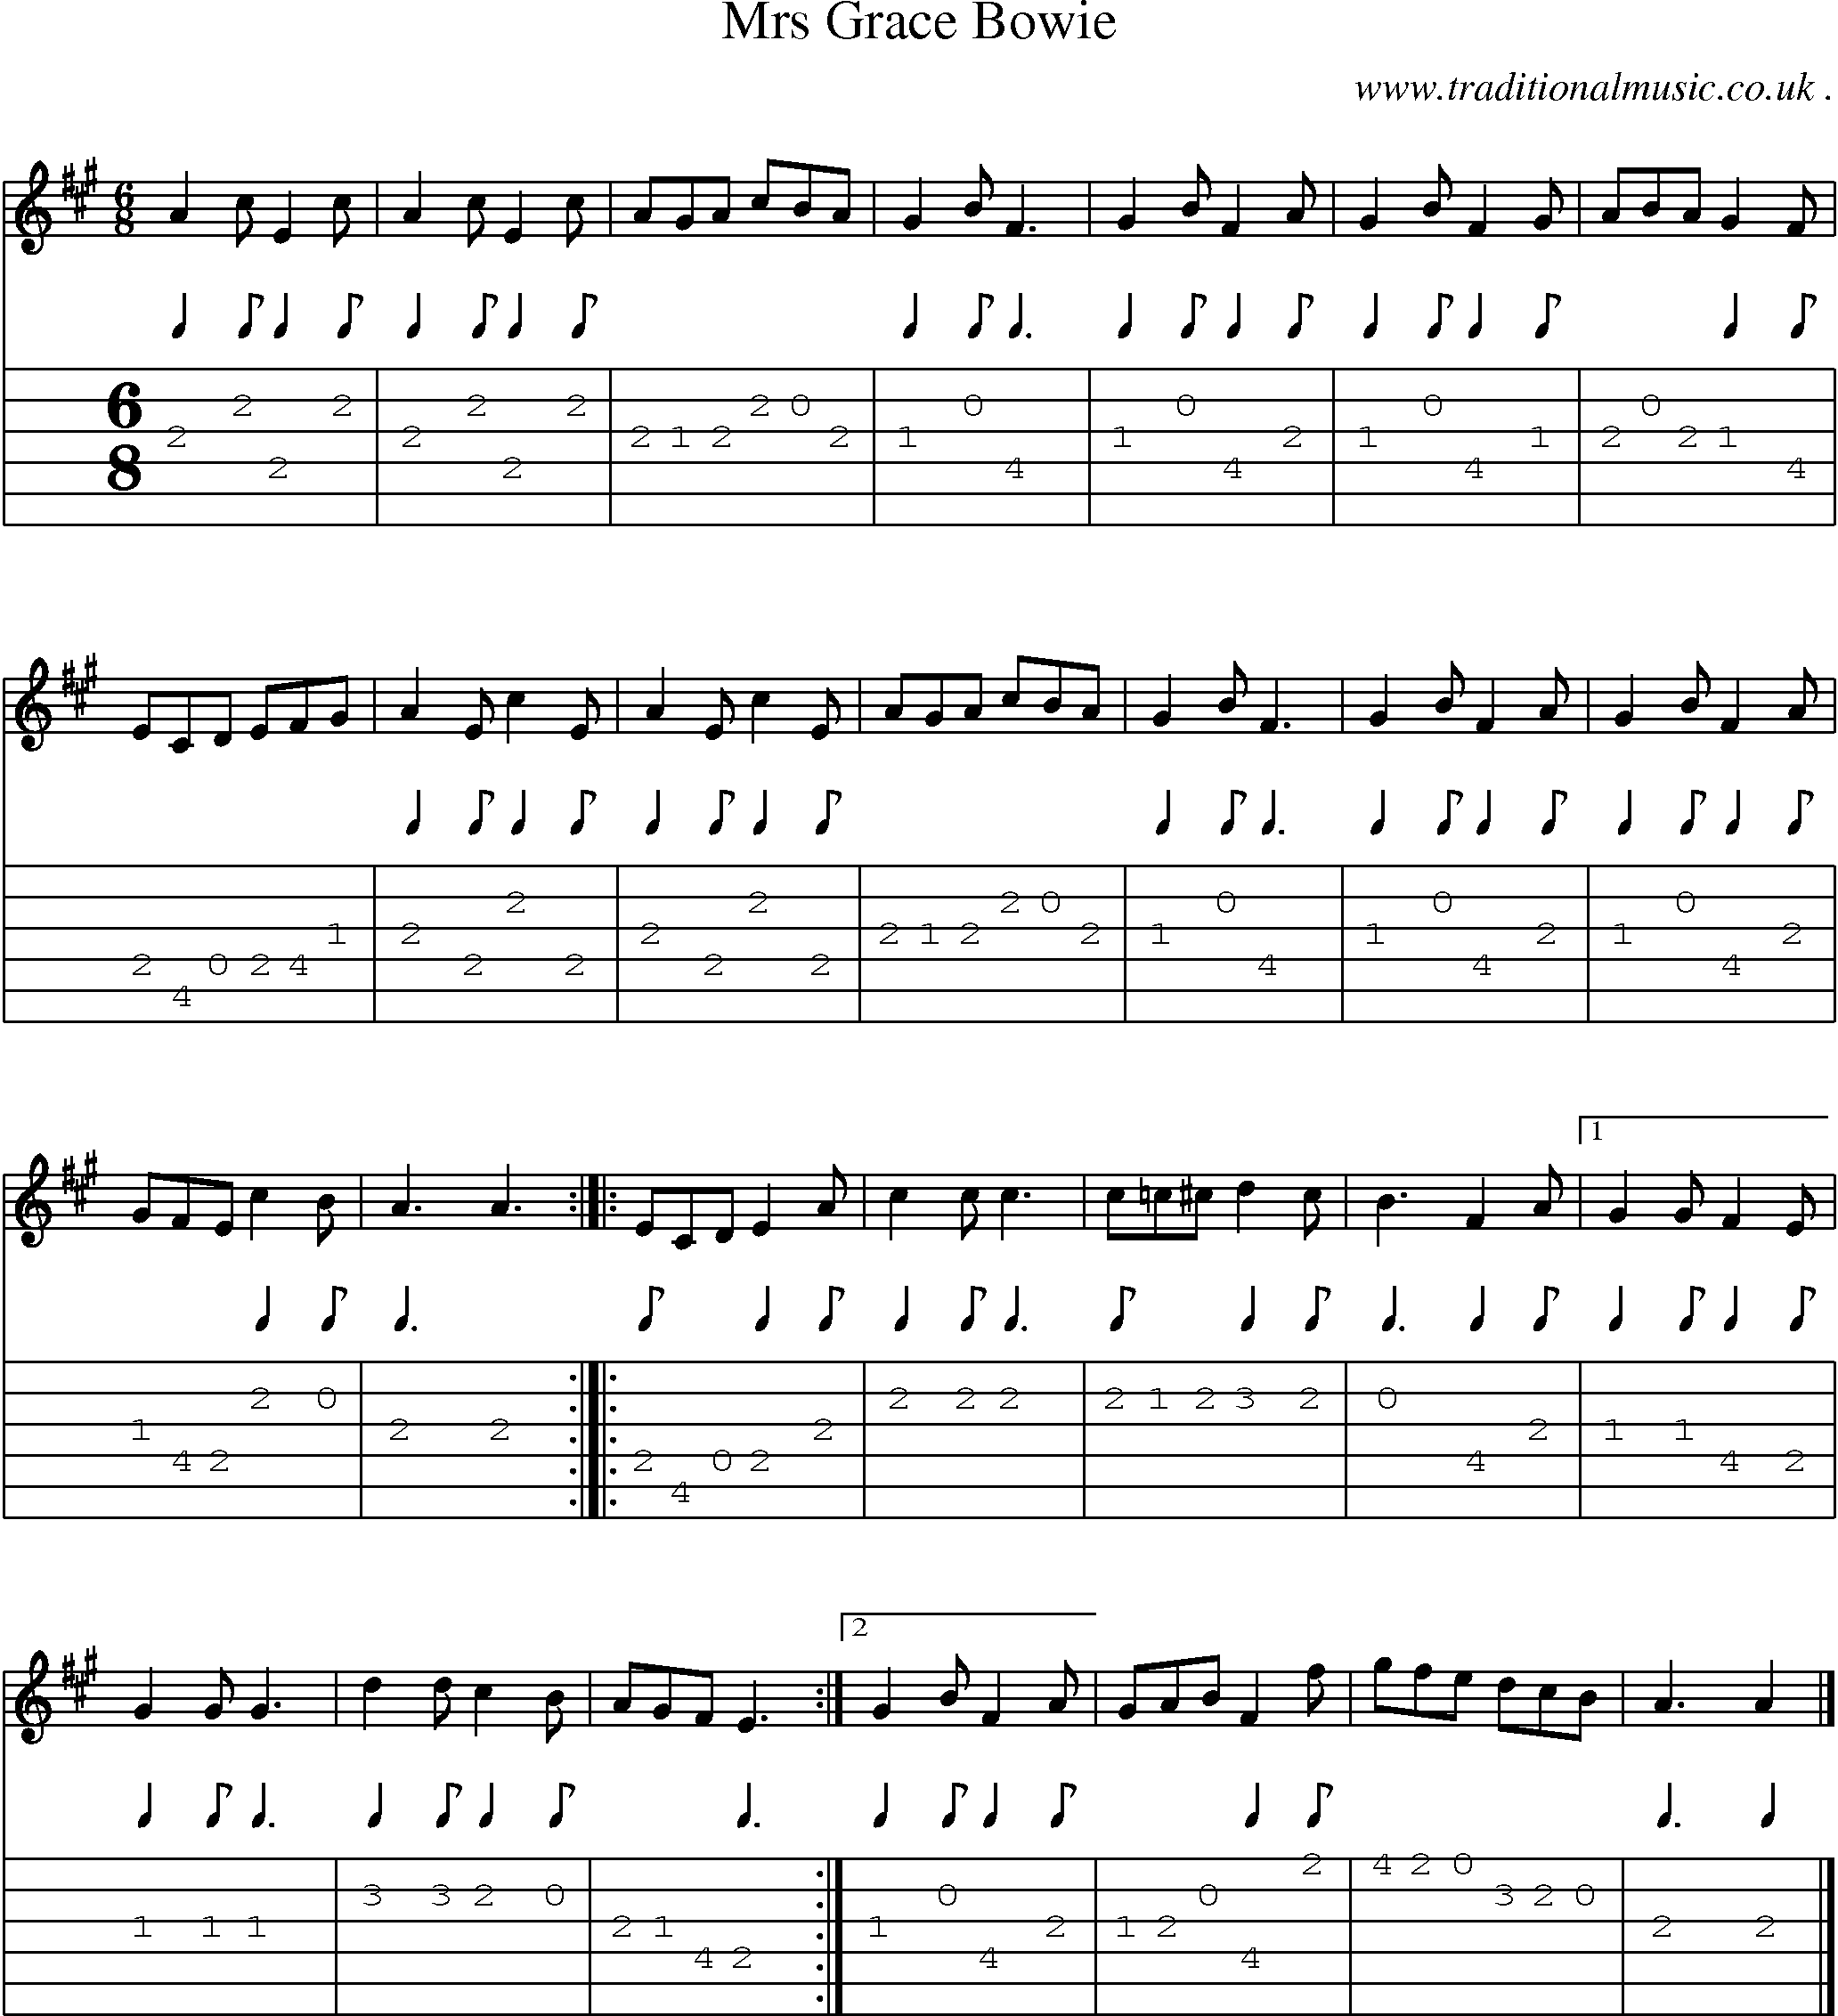 Sheet-music  score, Chords and Guitar Tabs for Mrs Grace Bowie